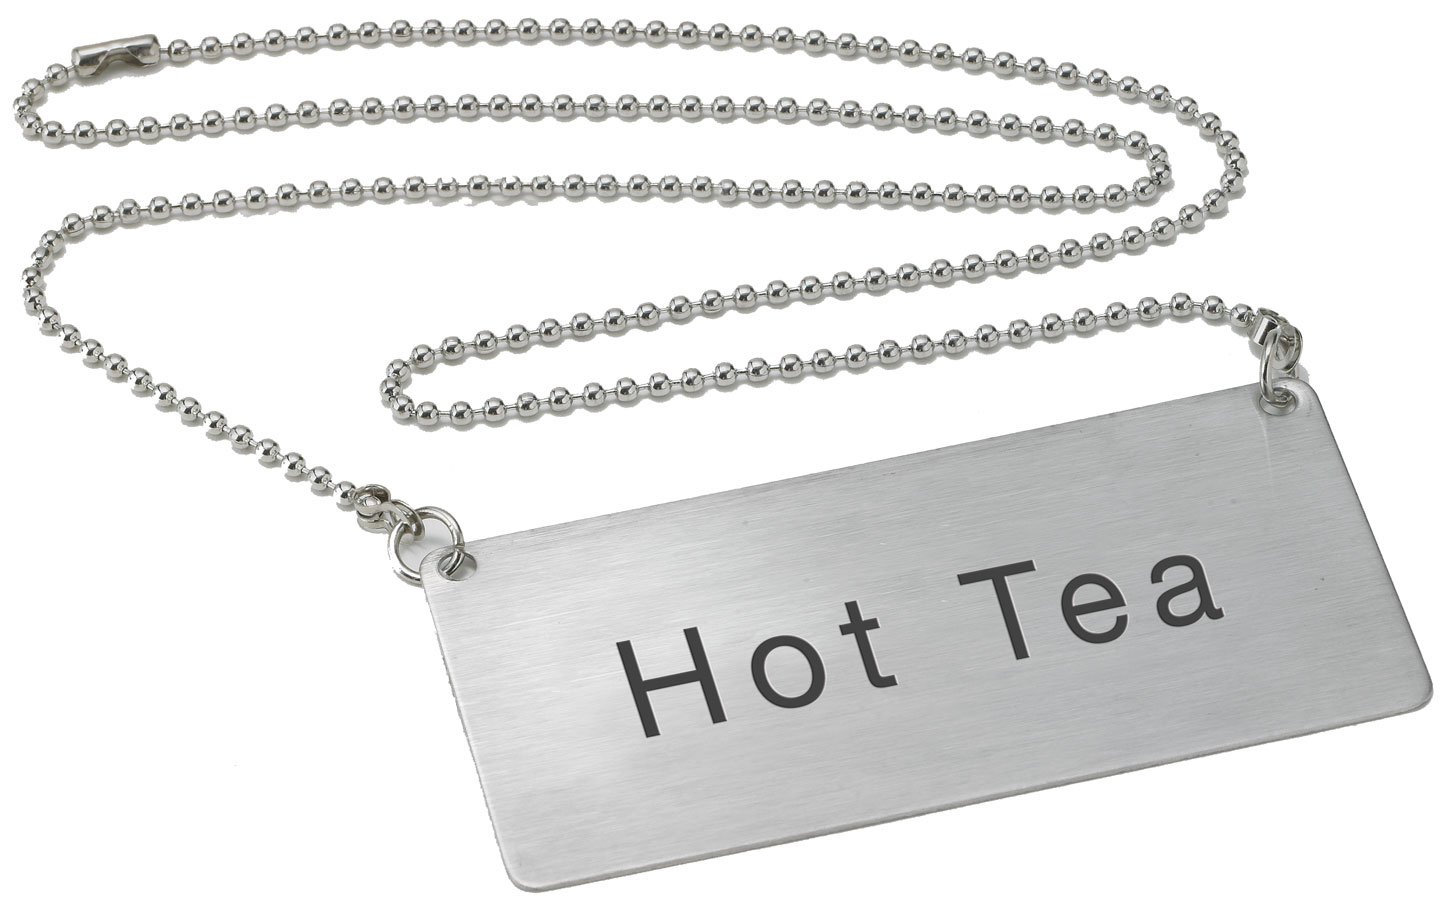 LeRose Stainless Steel Chain Signs ~ Set of 5 ~"Coffee","Decaf","Hot Water","Hot Tea","Iced Tea" ~ 3-1/2" x 1-3/4" Beverage Table Display Signs